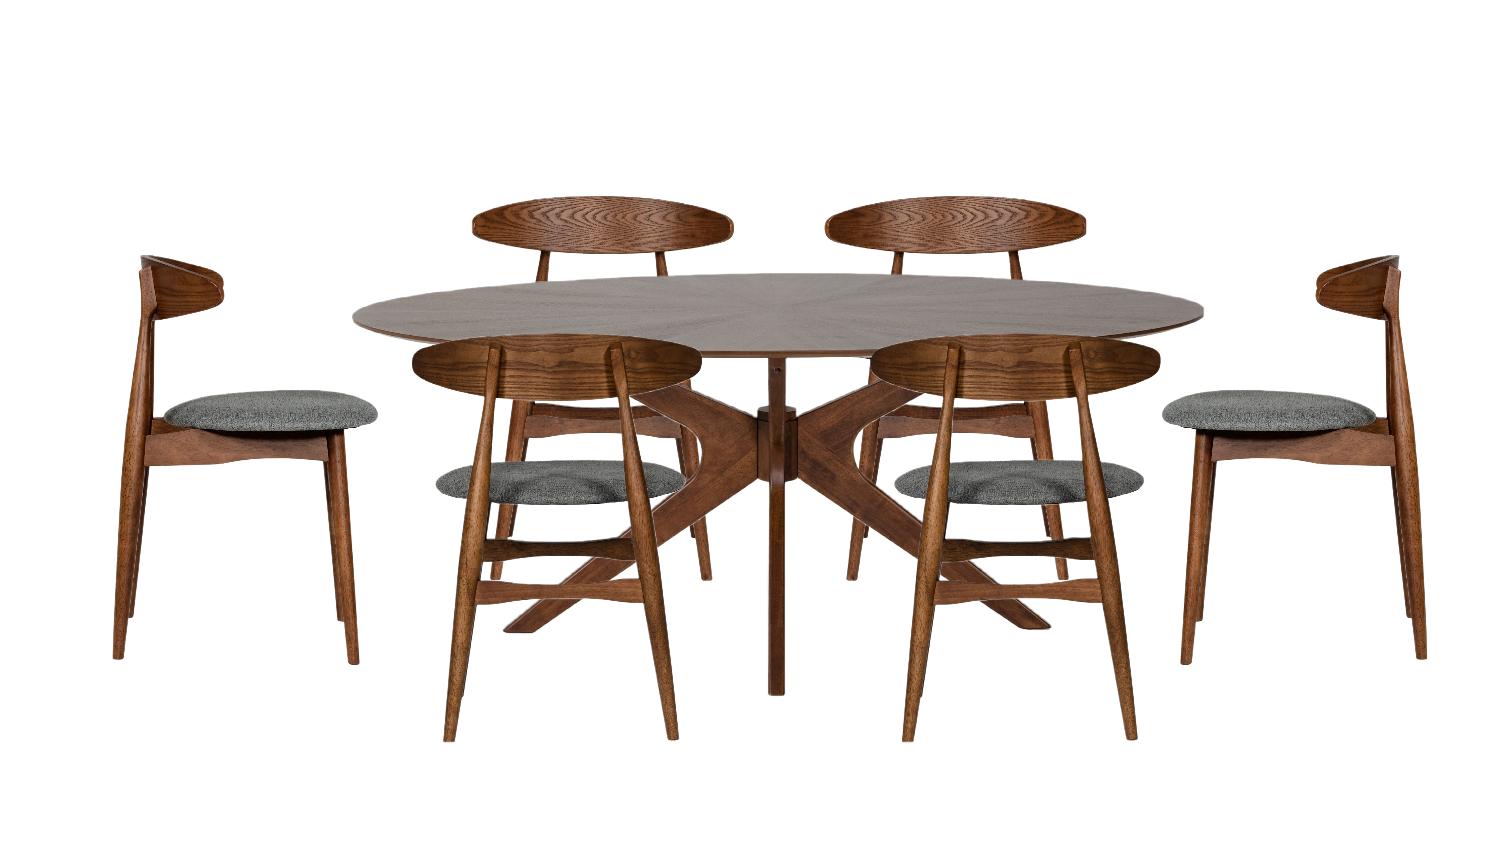 Contemporary, Modern Dining Room Set Prospect VGMAMIT-5276-1-7pcs in Walnut Fabric